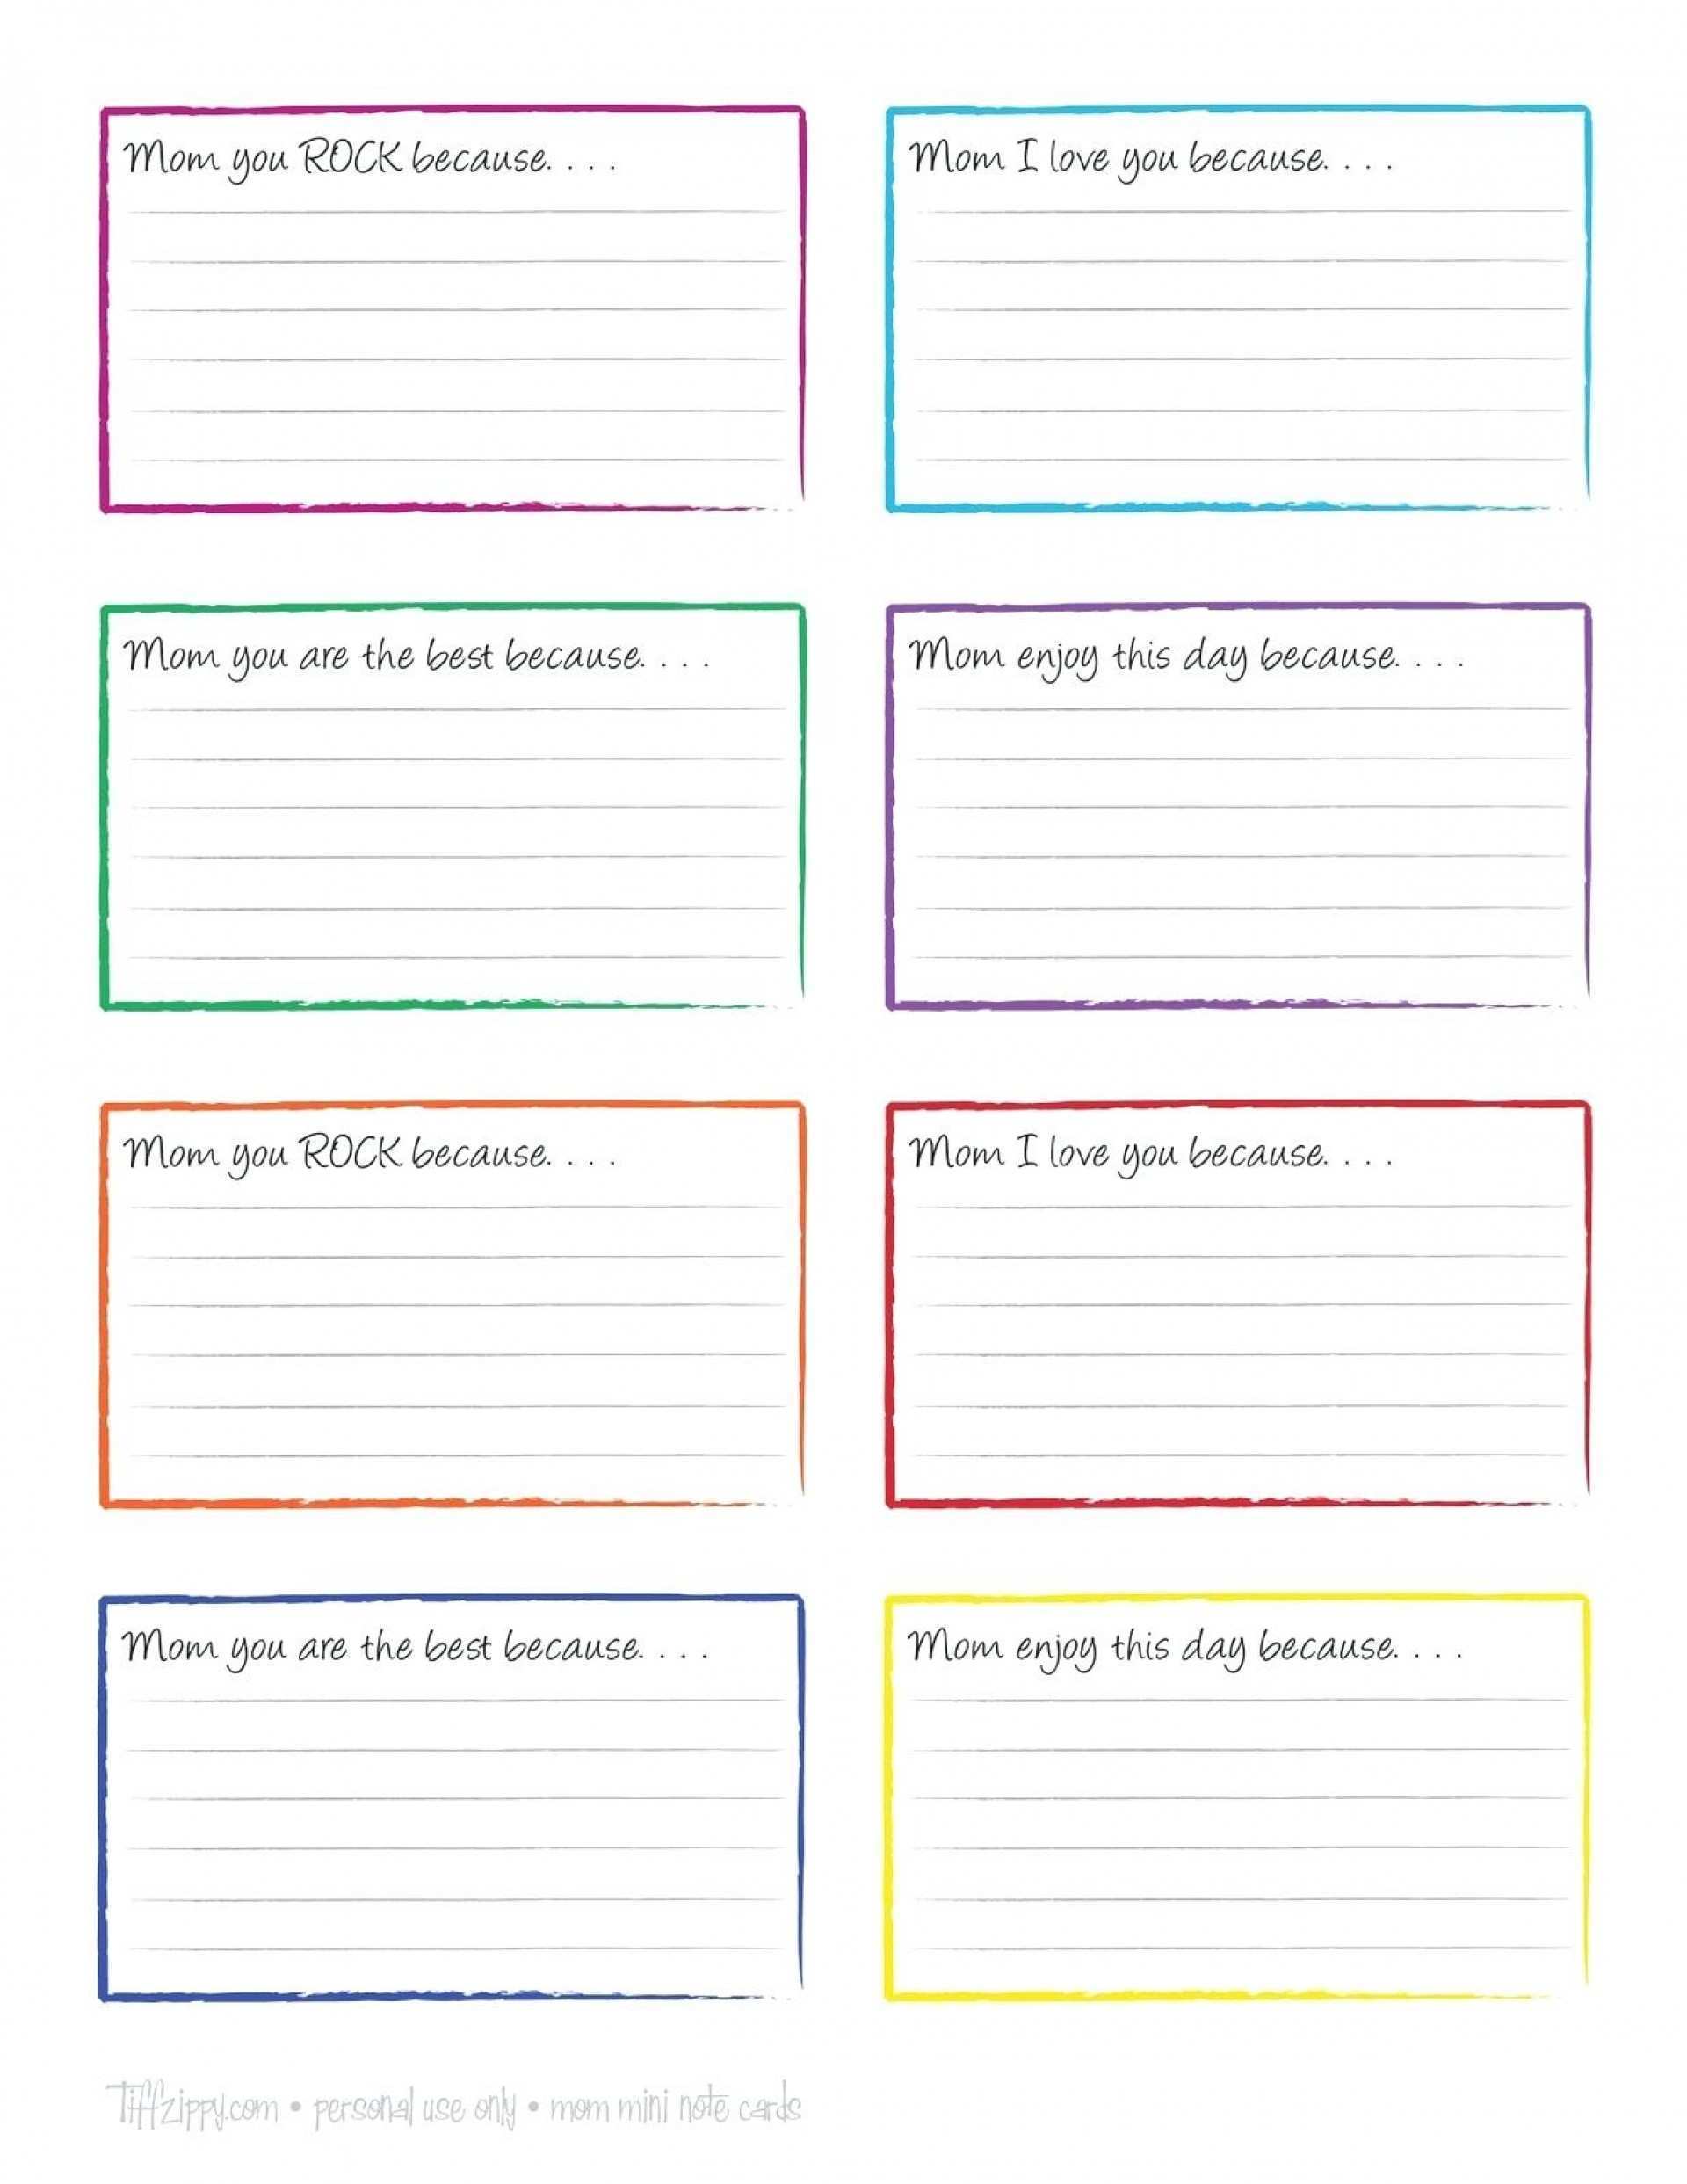 21 Format 5X7 Note Card Template For Word Download for 5X7 Note Card Template For Word